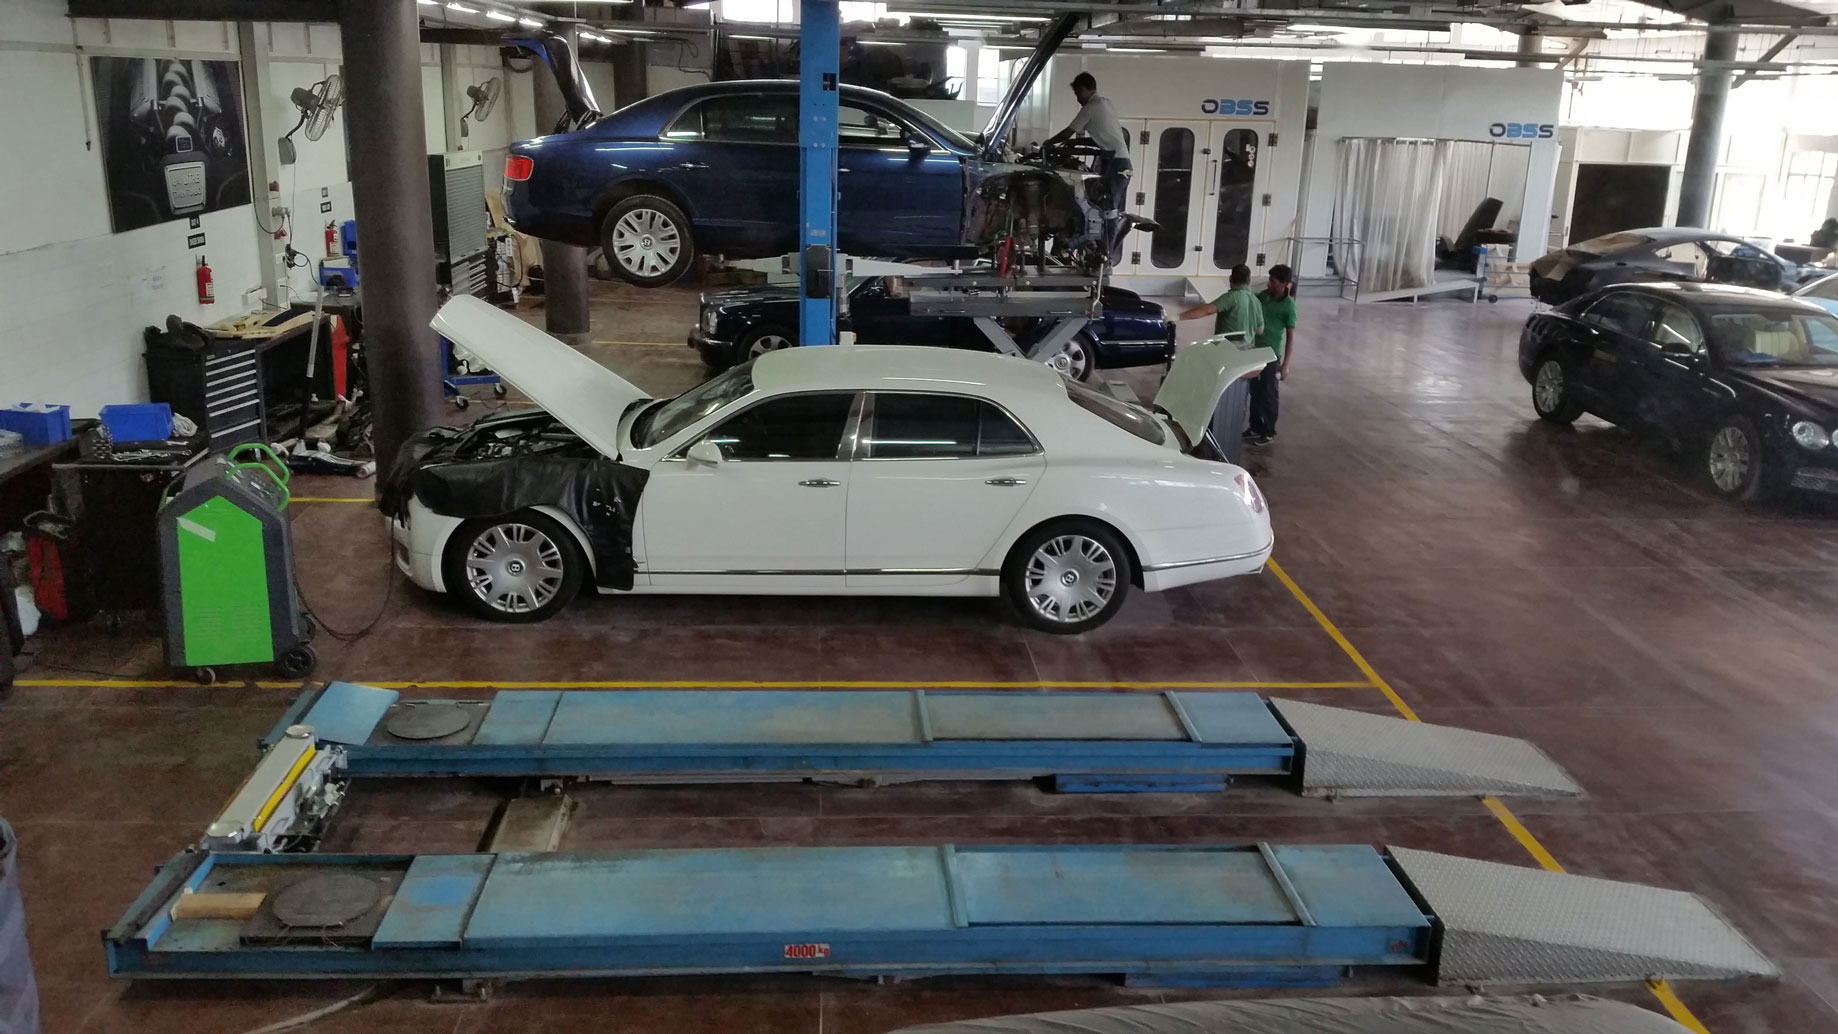 Group of mechanics repair cars inside a dealership equipped with Ravaglioli equipment